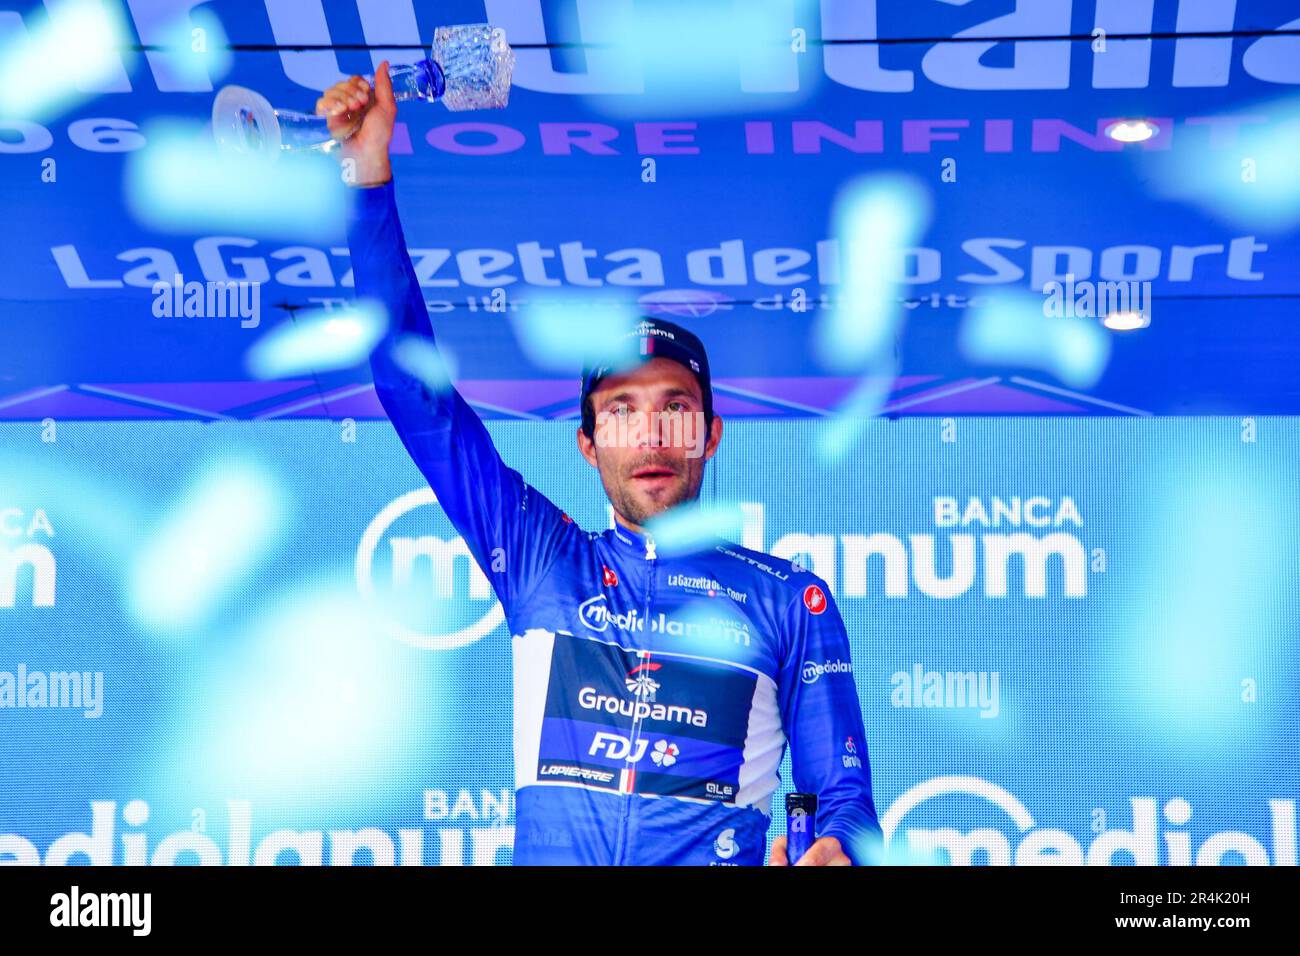 Rome, Italy. 28th May, 2023. Thibaut Pinot win the Maglia Azzurra- Giro d' Italia 2023 during the Giro d'Italia 21 stage - Roma - Roma on May 28, 2023  at the Rome in